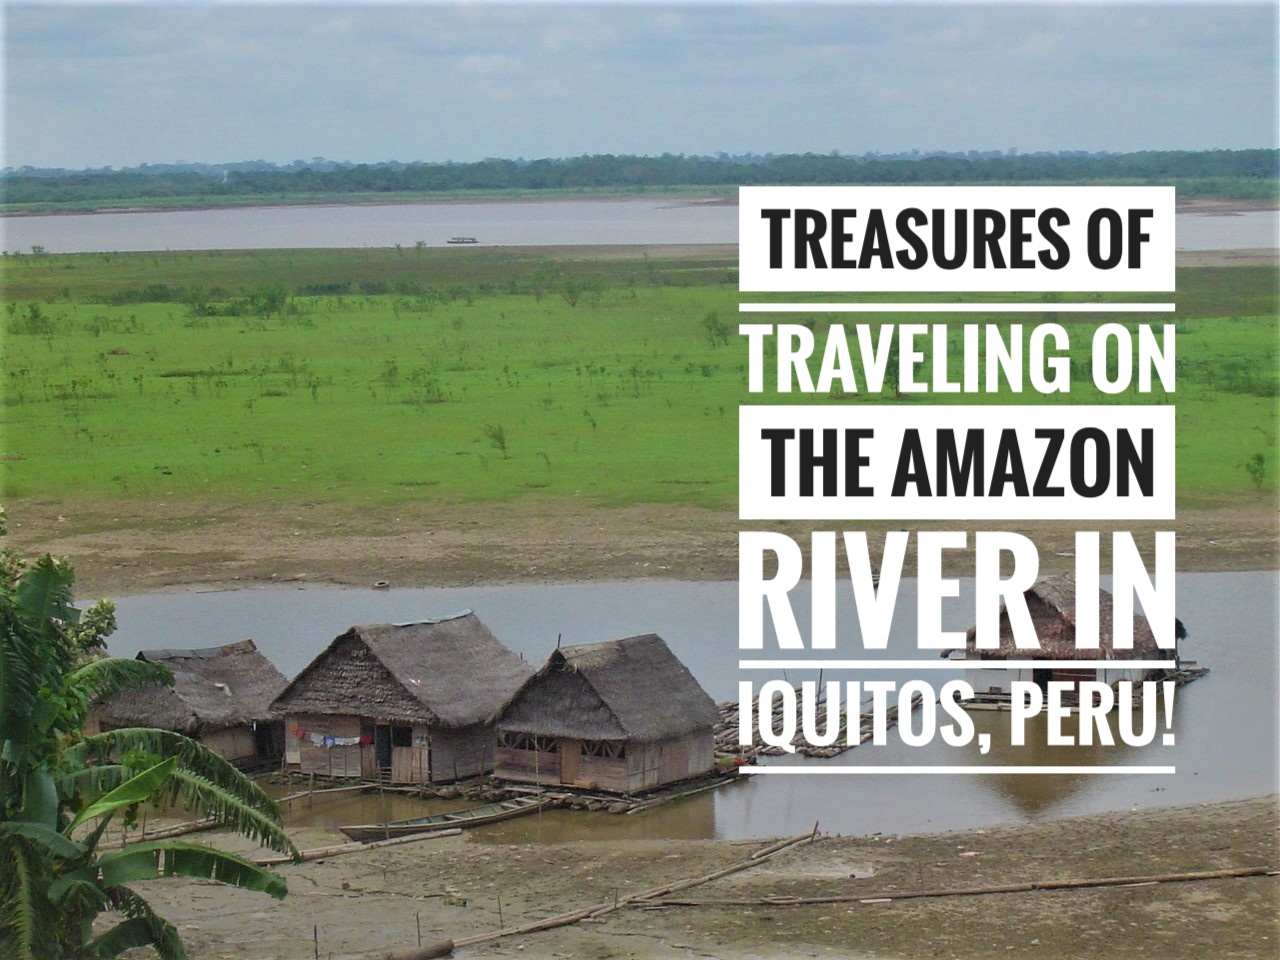 Treasures of Traveling on the Amazon River in Iquitos, Peru!